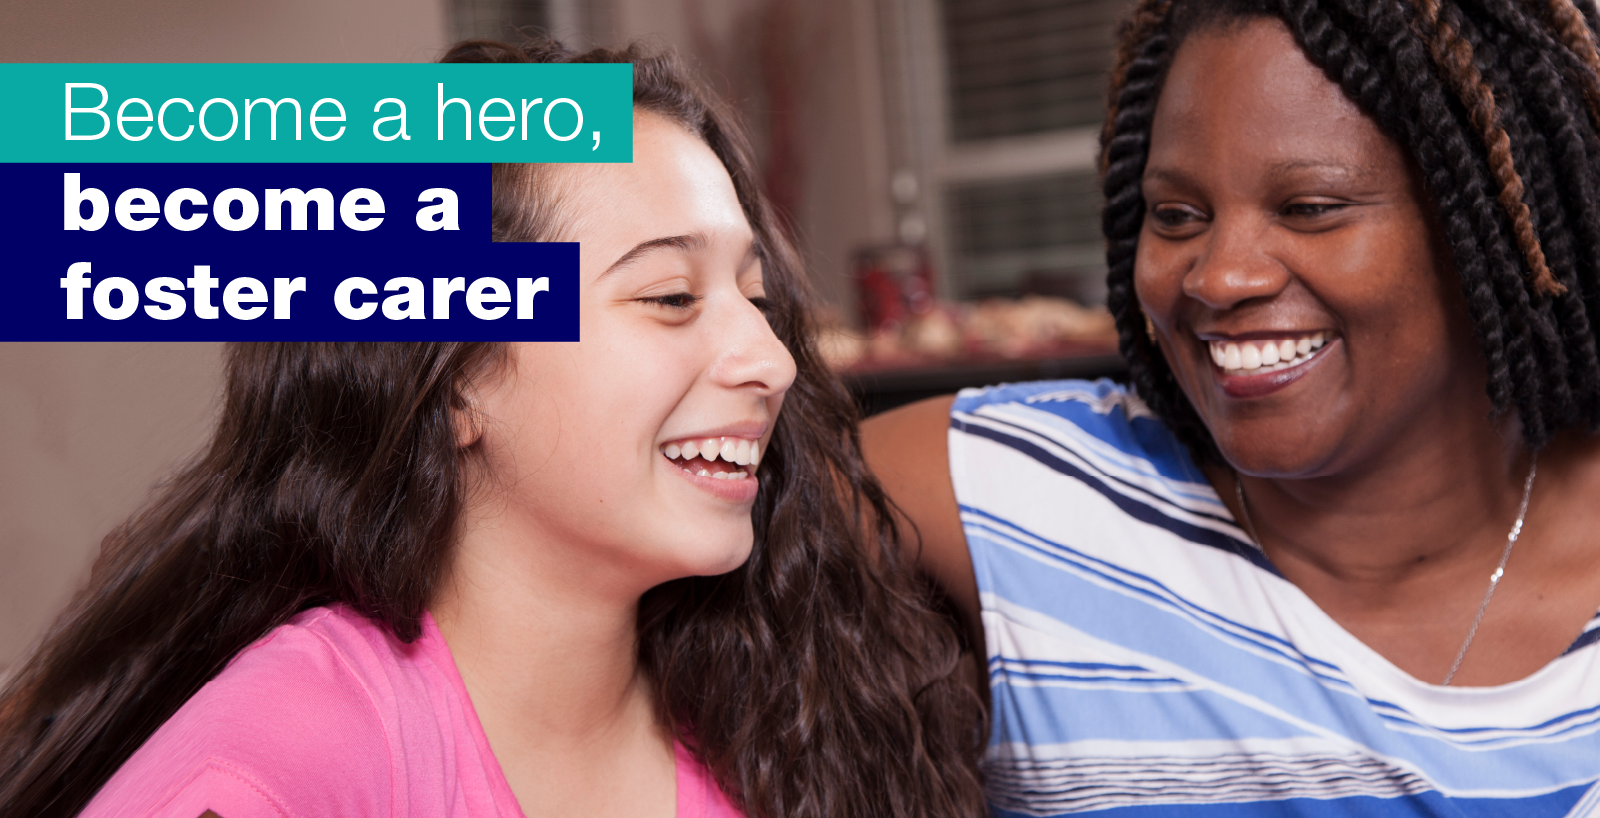 Could you be a foster carer hero?